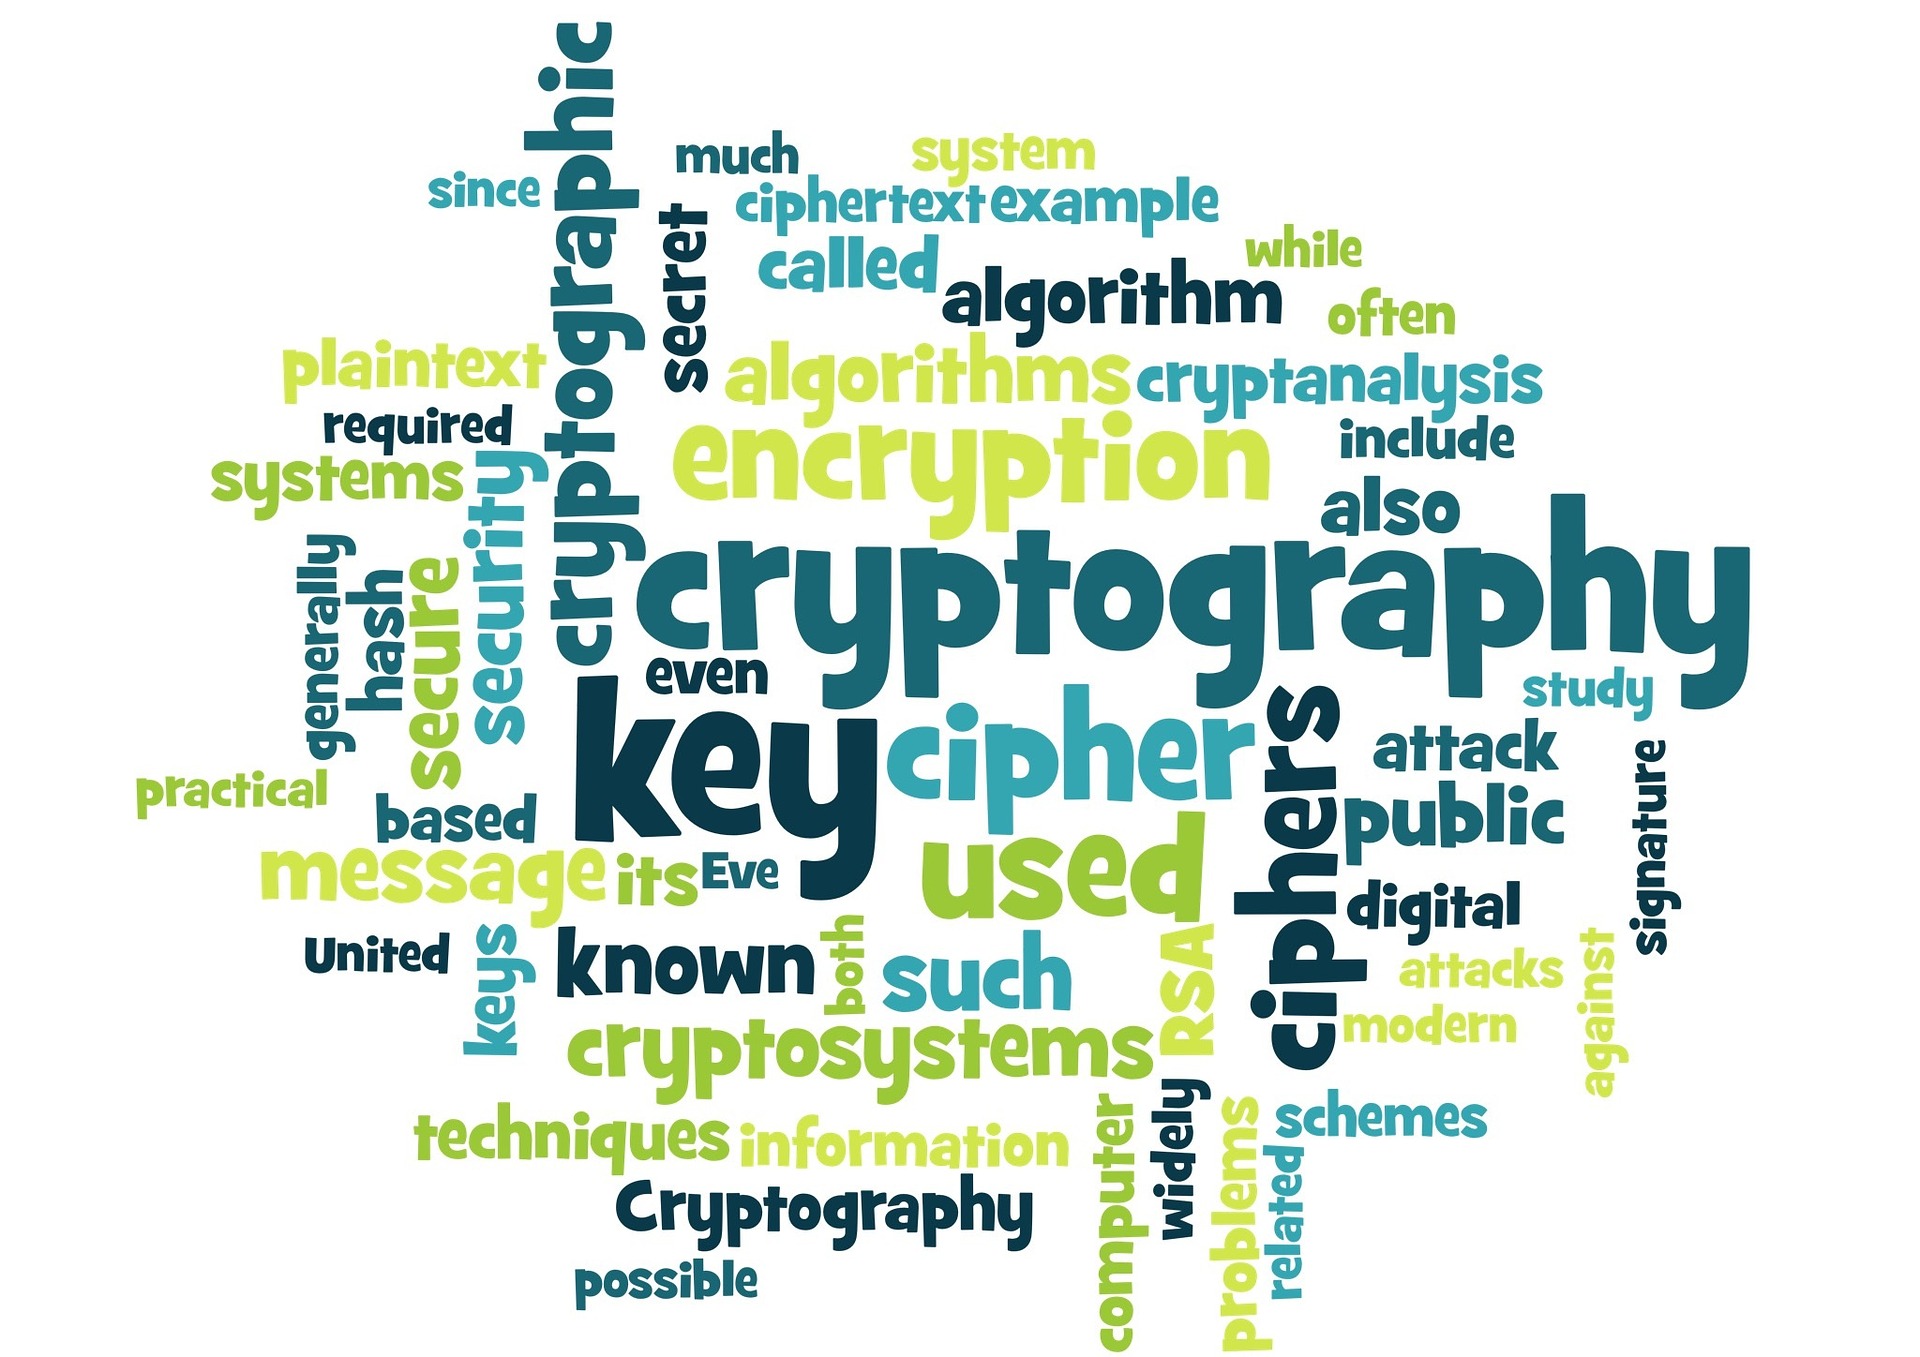 cryptography-1091254_1920